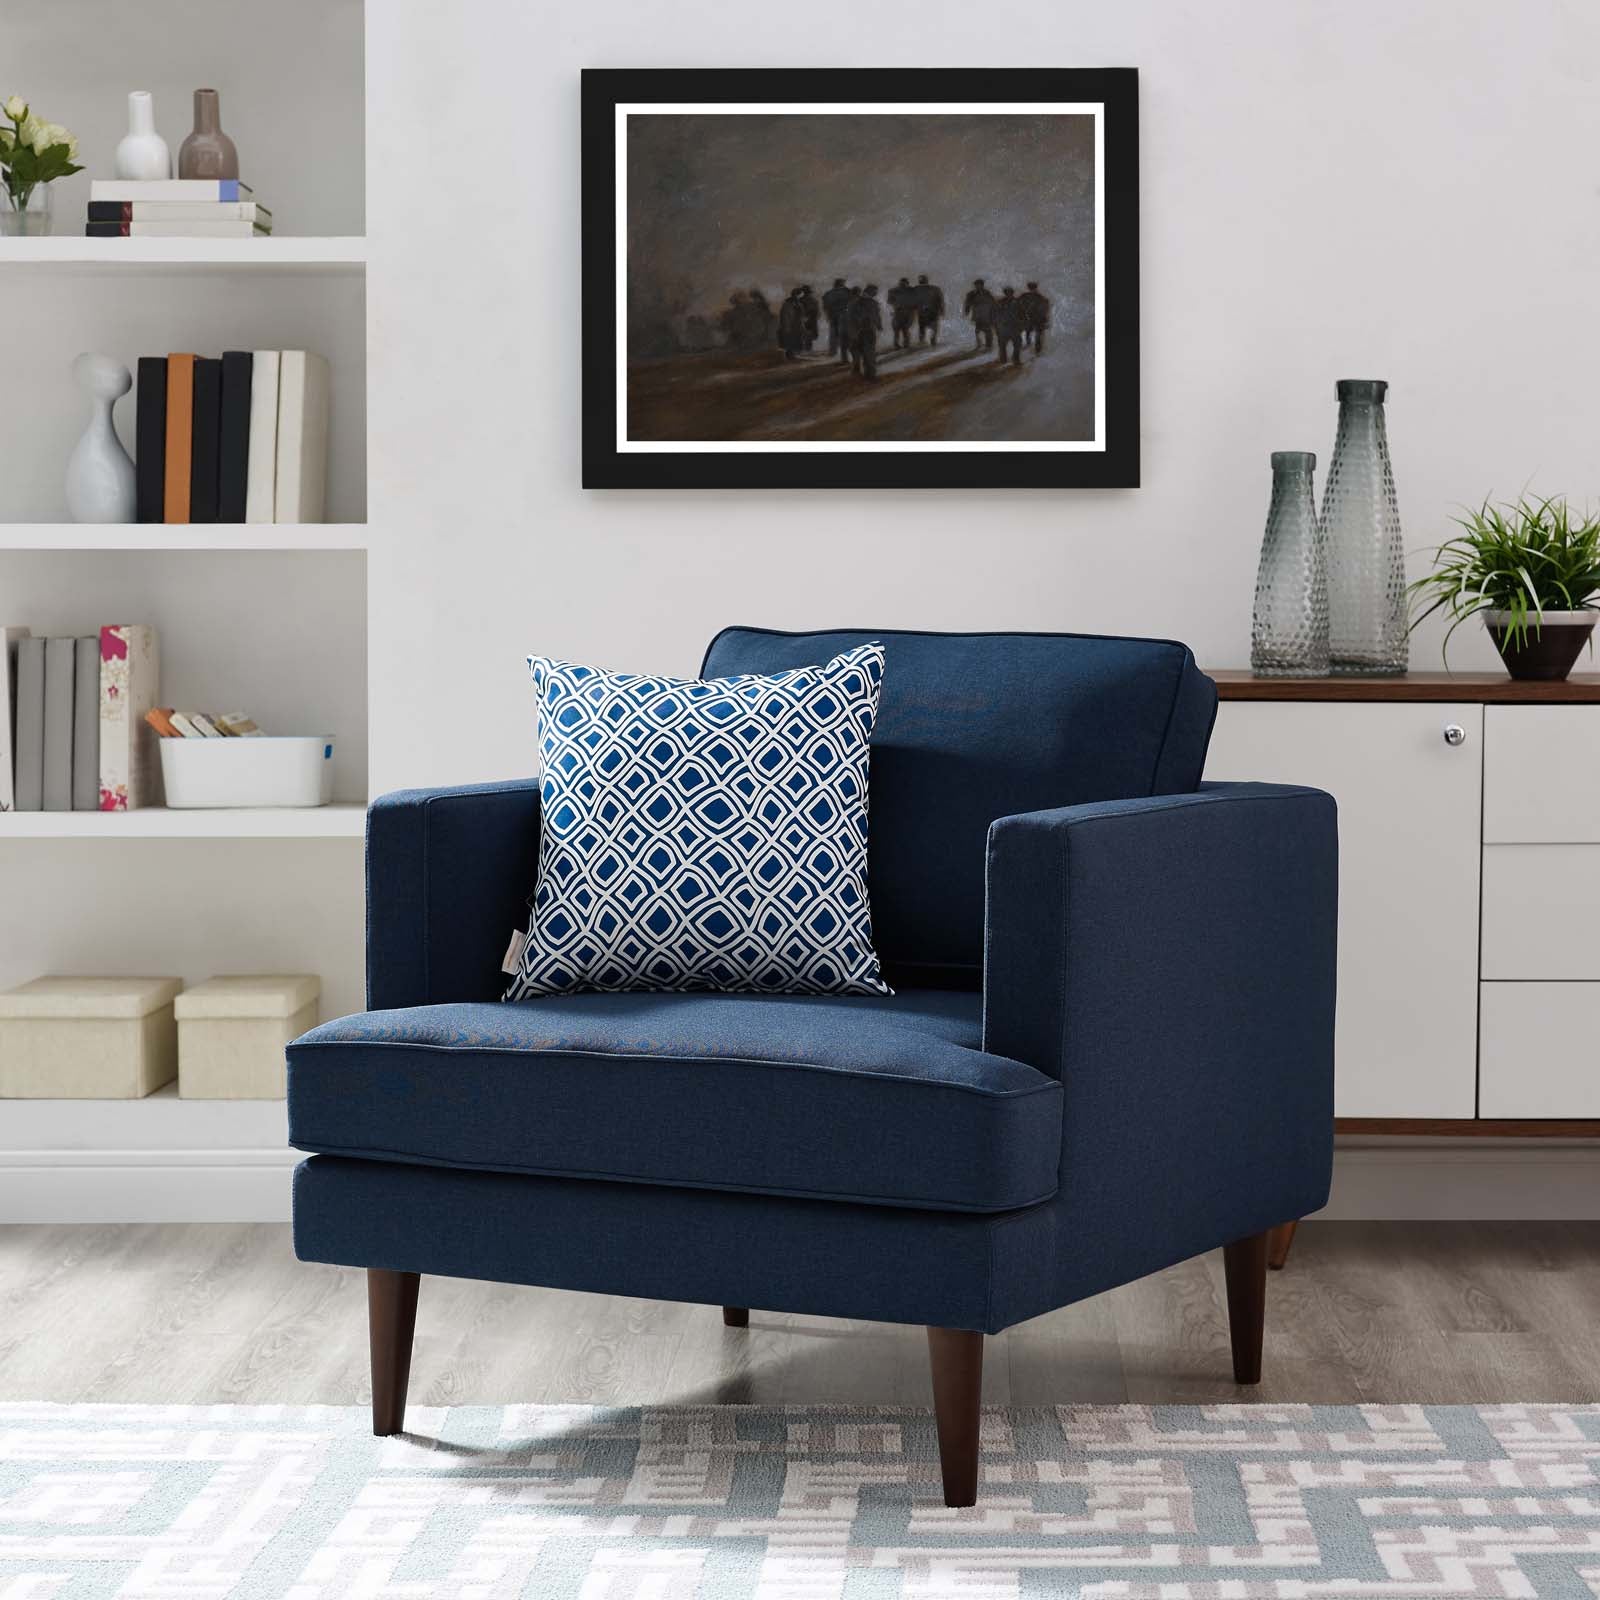 Modway Accent Chairs - Agile Upholstered Fabric Armchair Blue